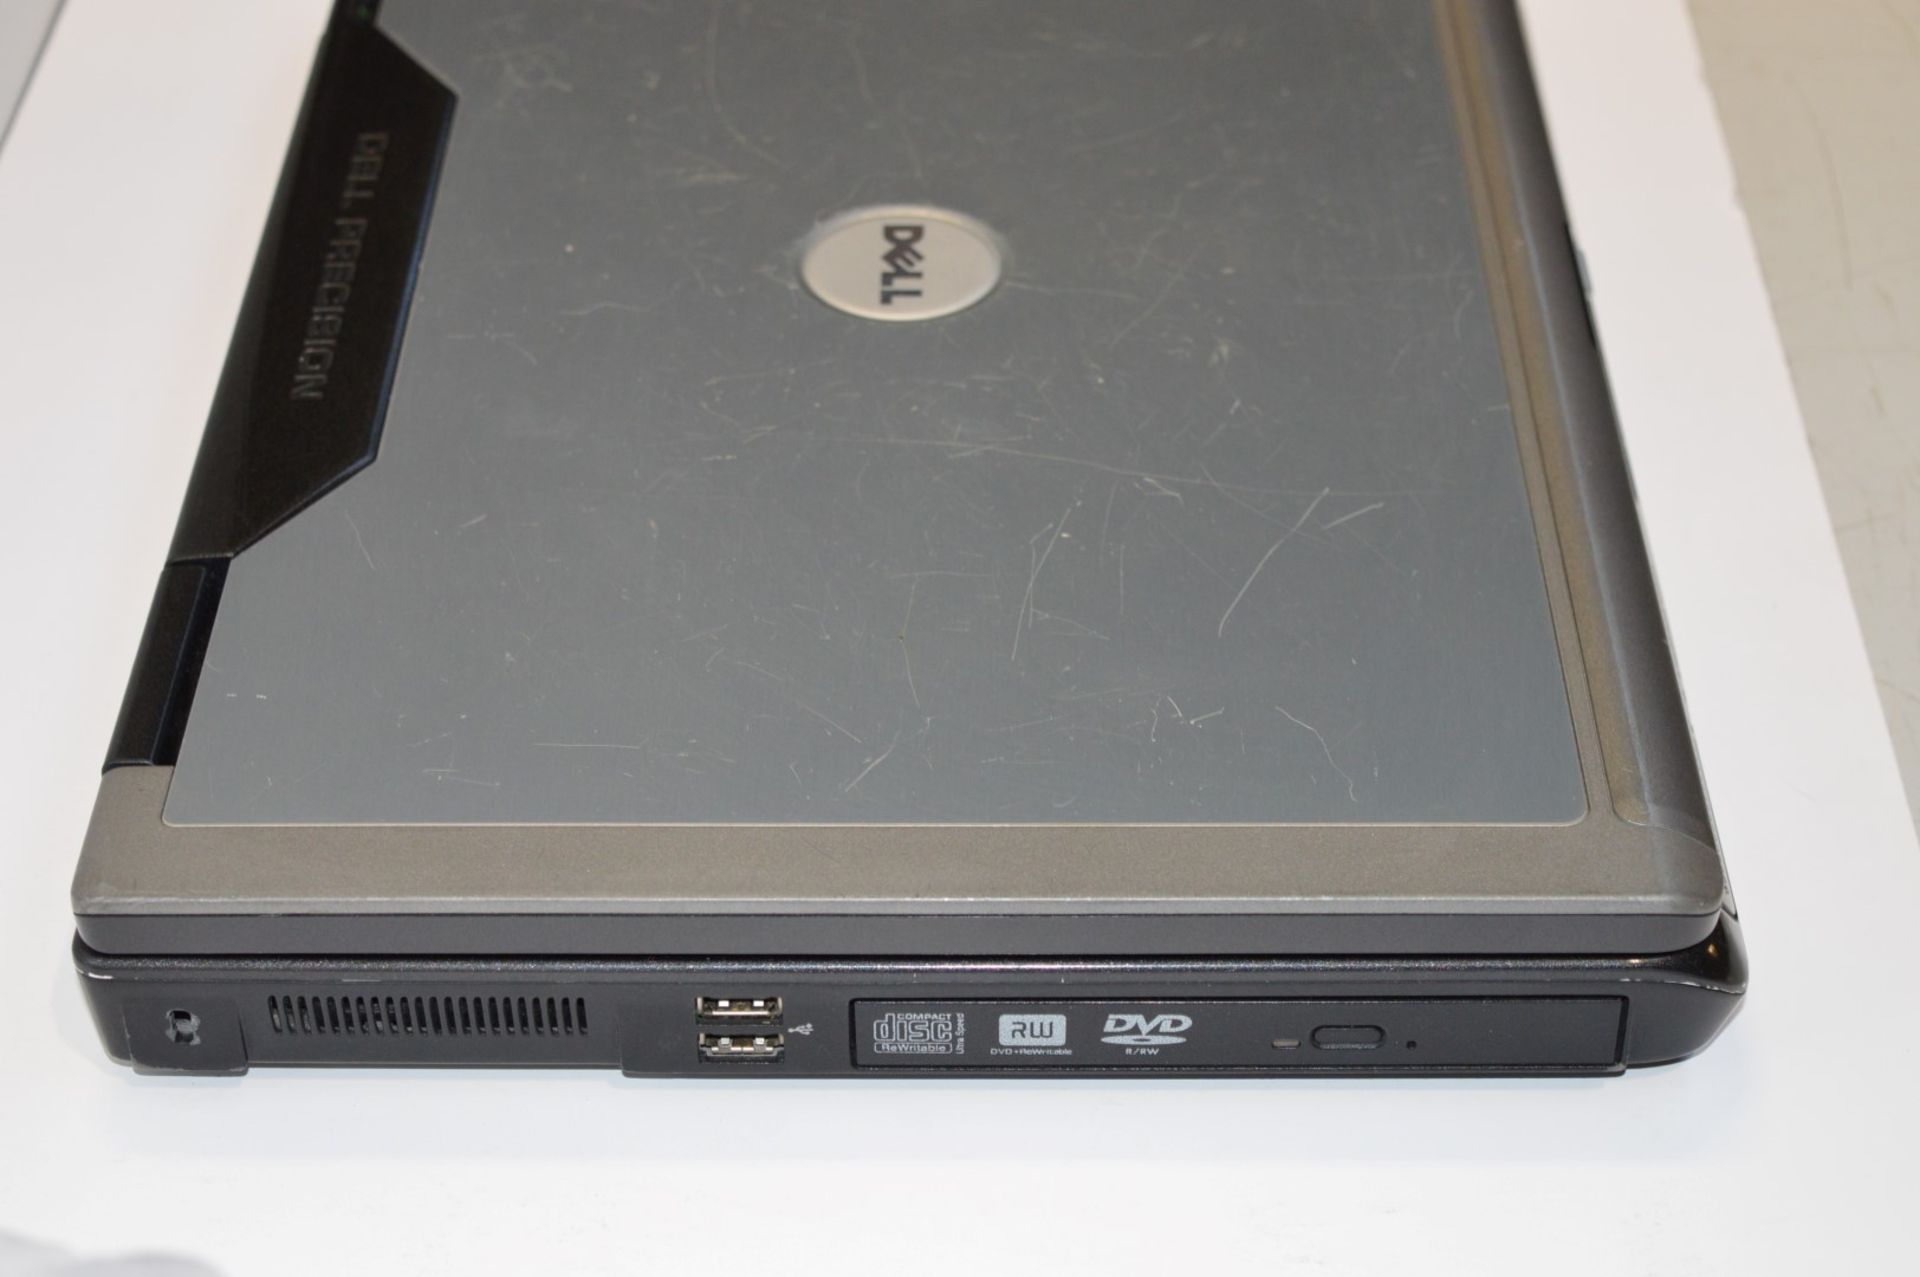 1 x Dell M90 17 Inch Laptop Computer - Features an Intel Core 2 Duo 2.16ghz Processor, 160gb Hard - Image 9 of 12